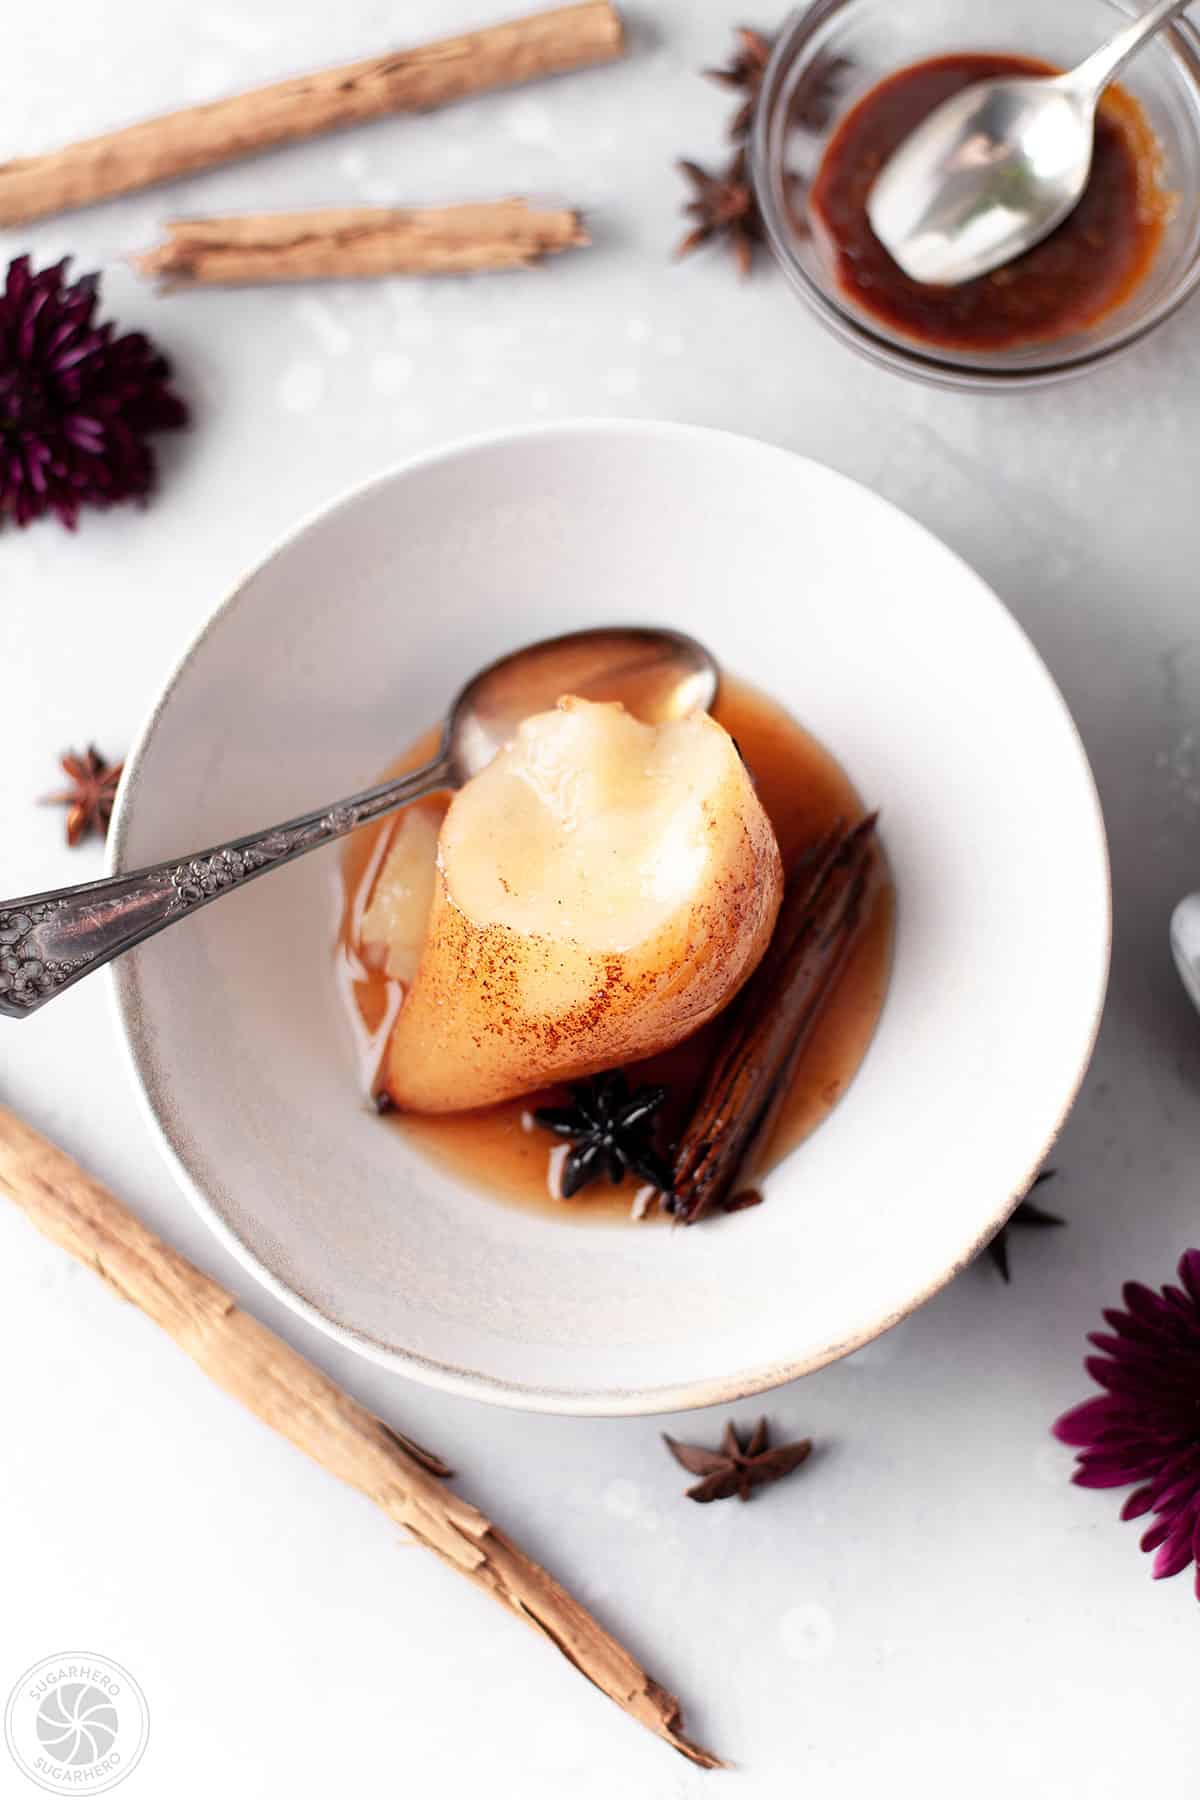 A Poached Pear with a bite removed next to a silver spoon.